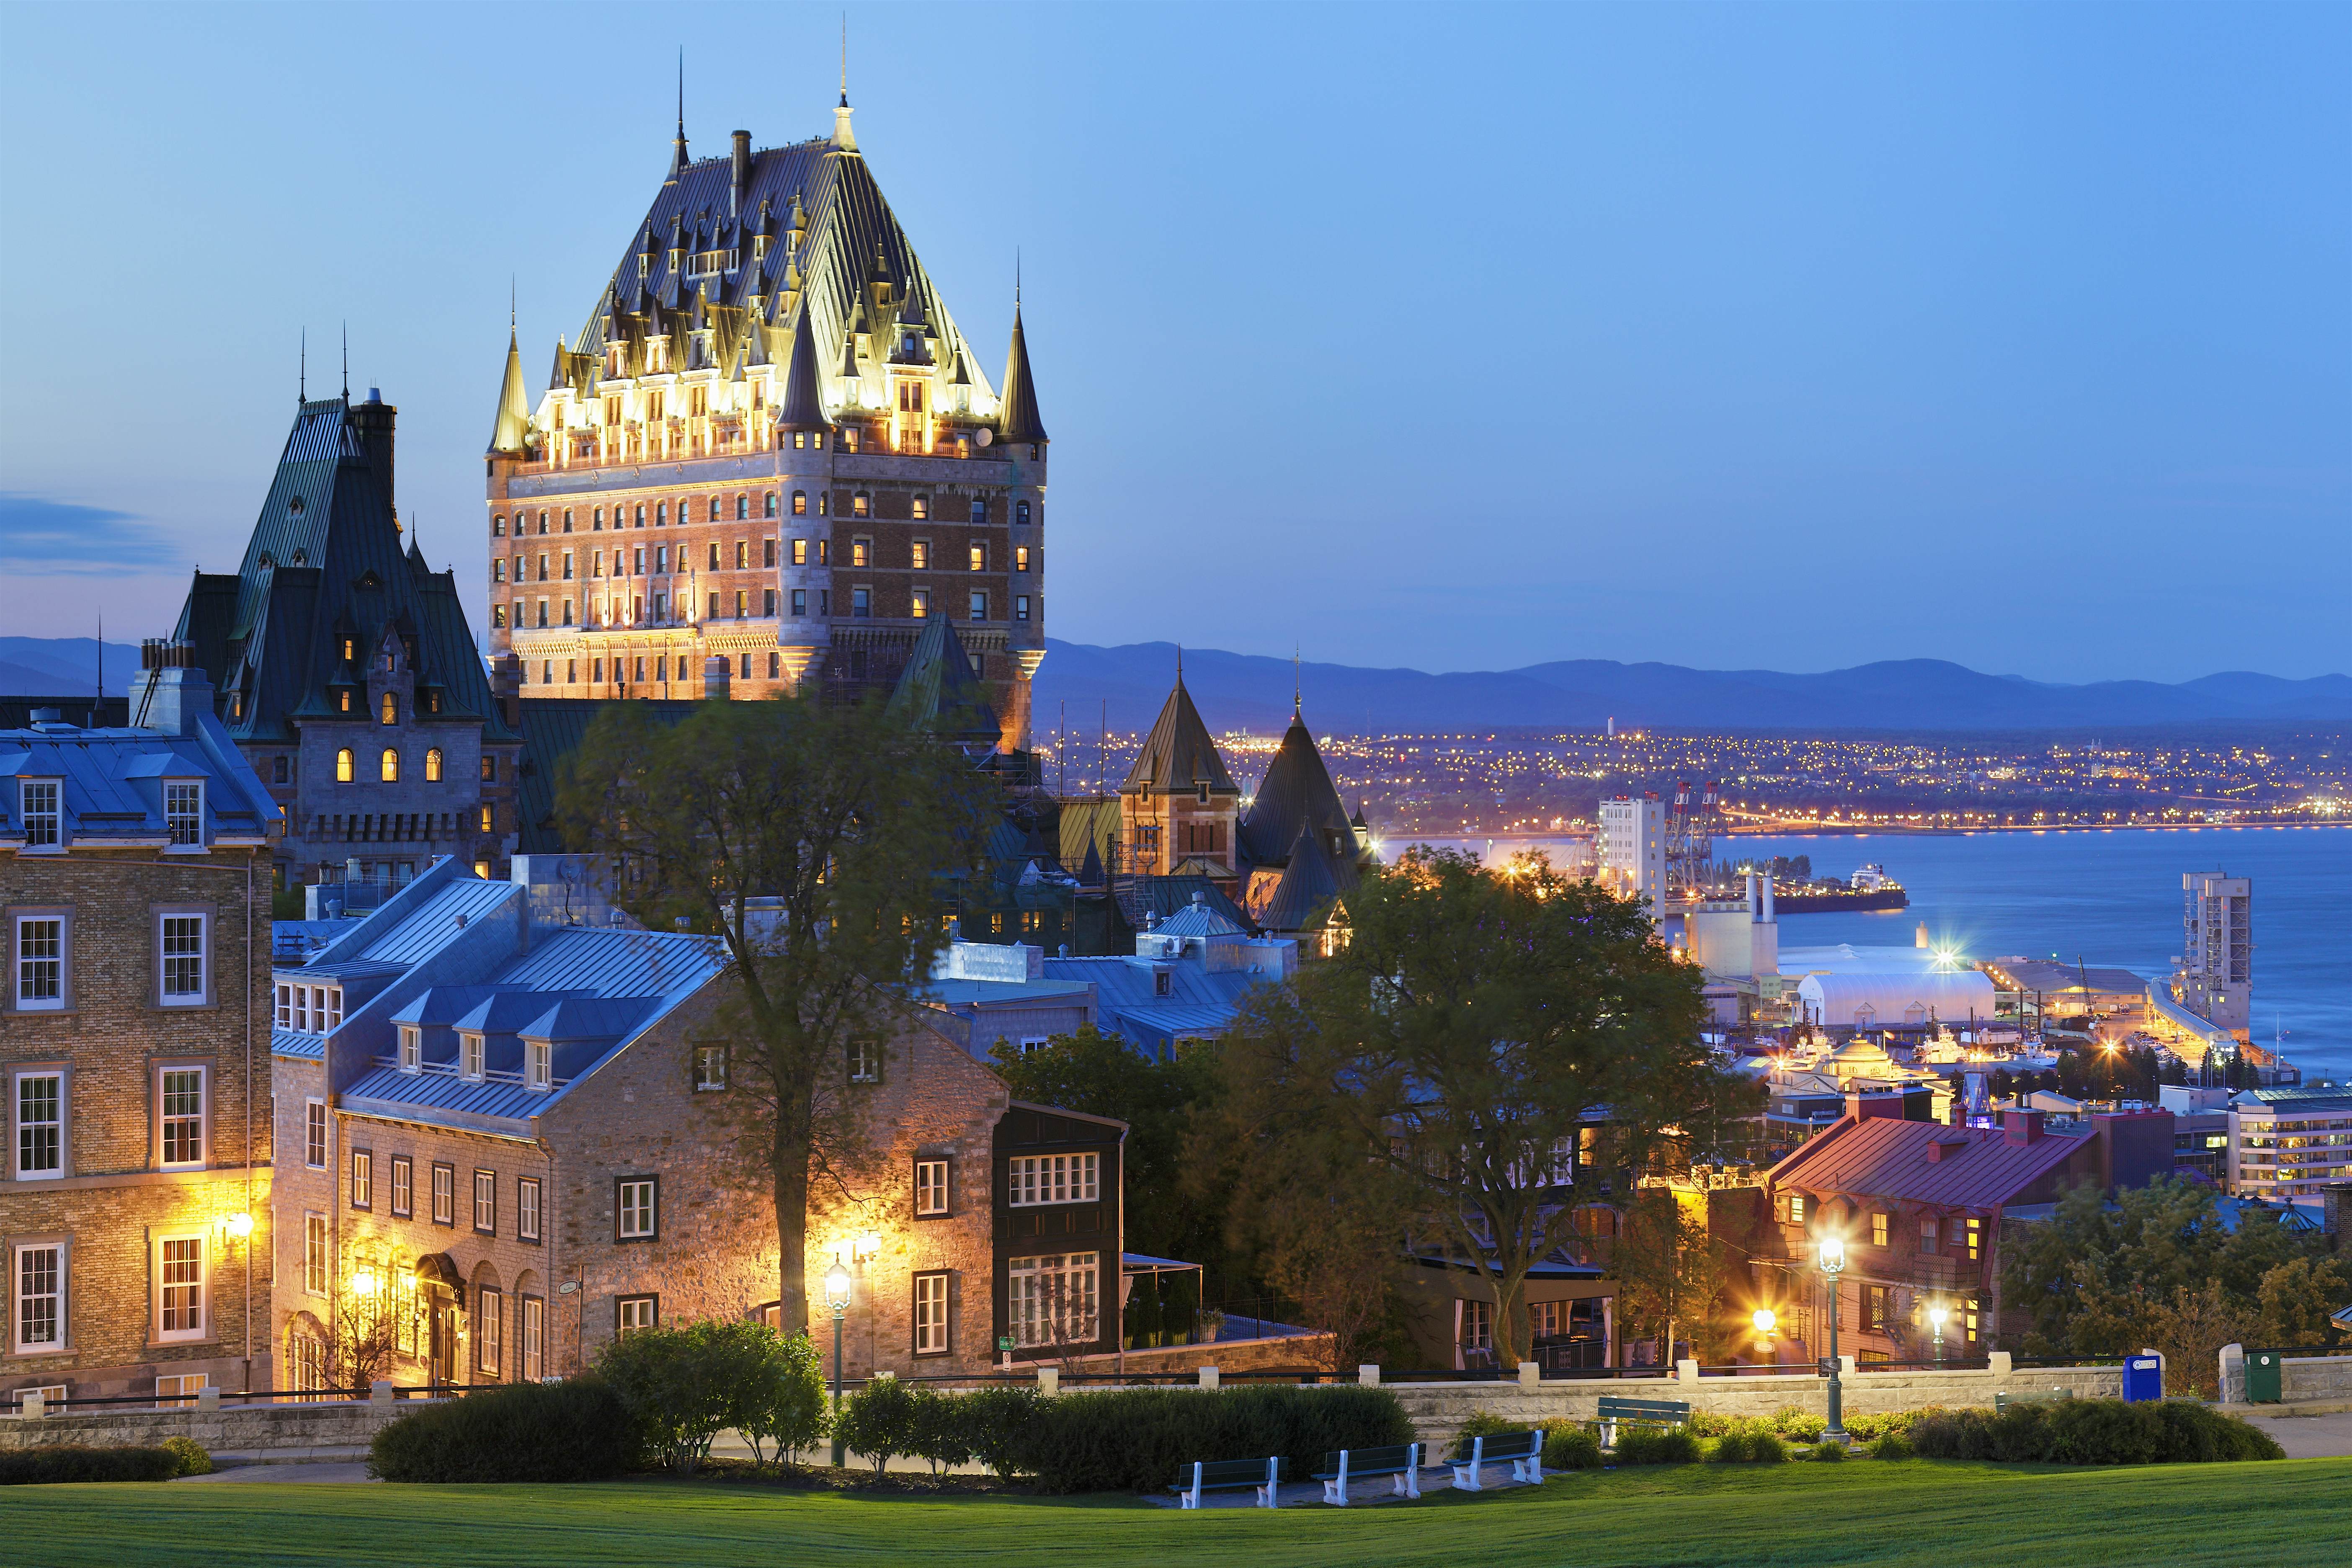 is a day trip to quebec city worth it